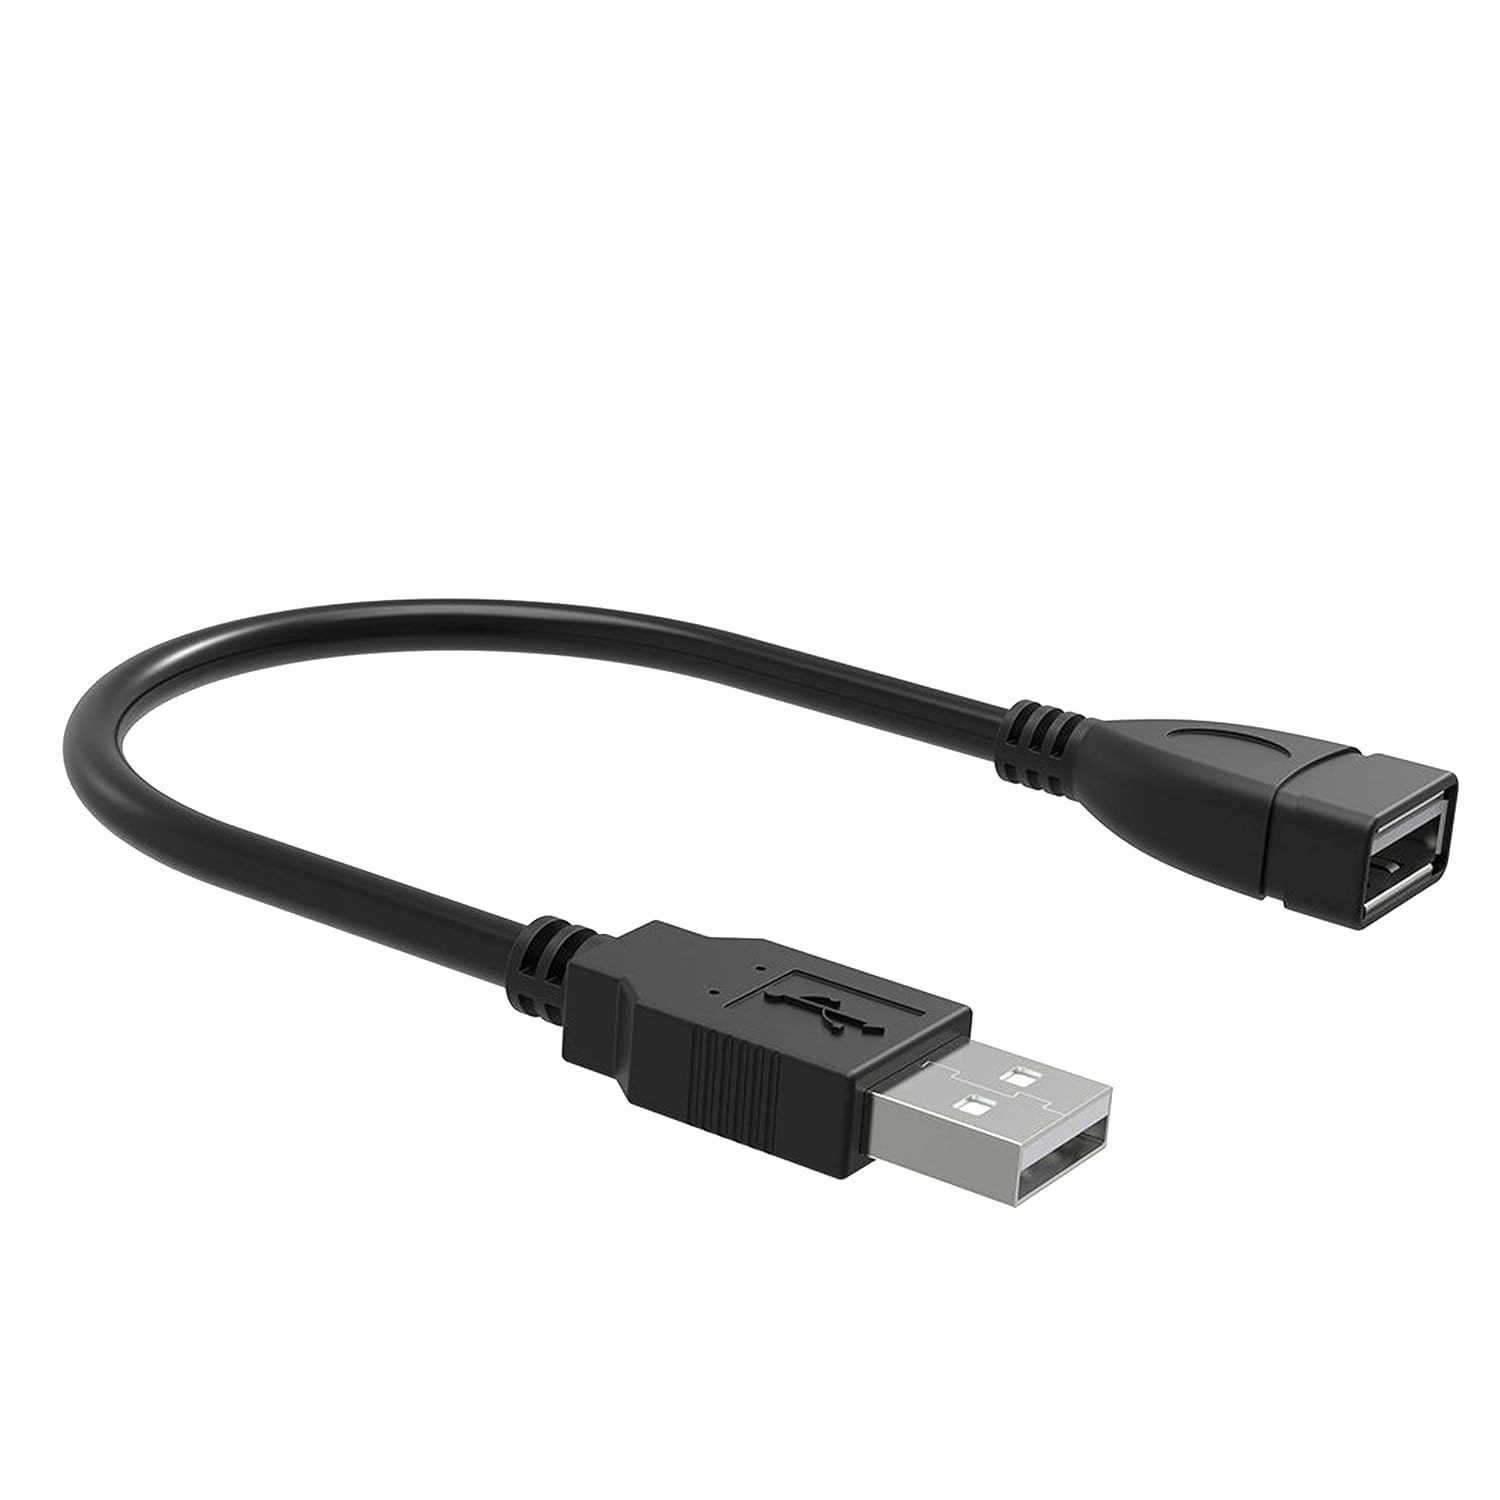 DictationOne USB-Ext USB 3.0 Adapter Extension 6-inch Adapter Plug